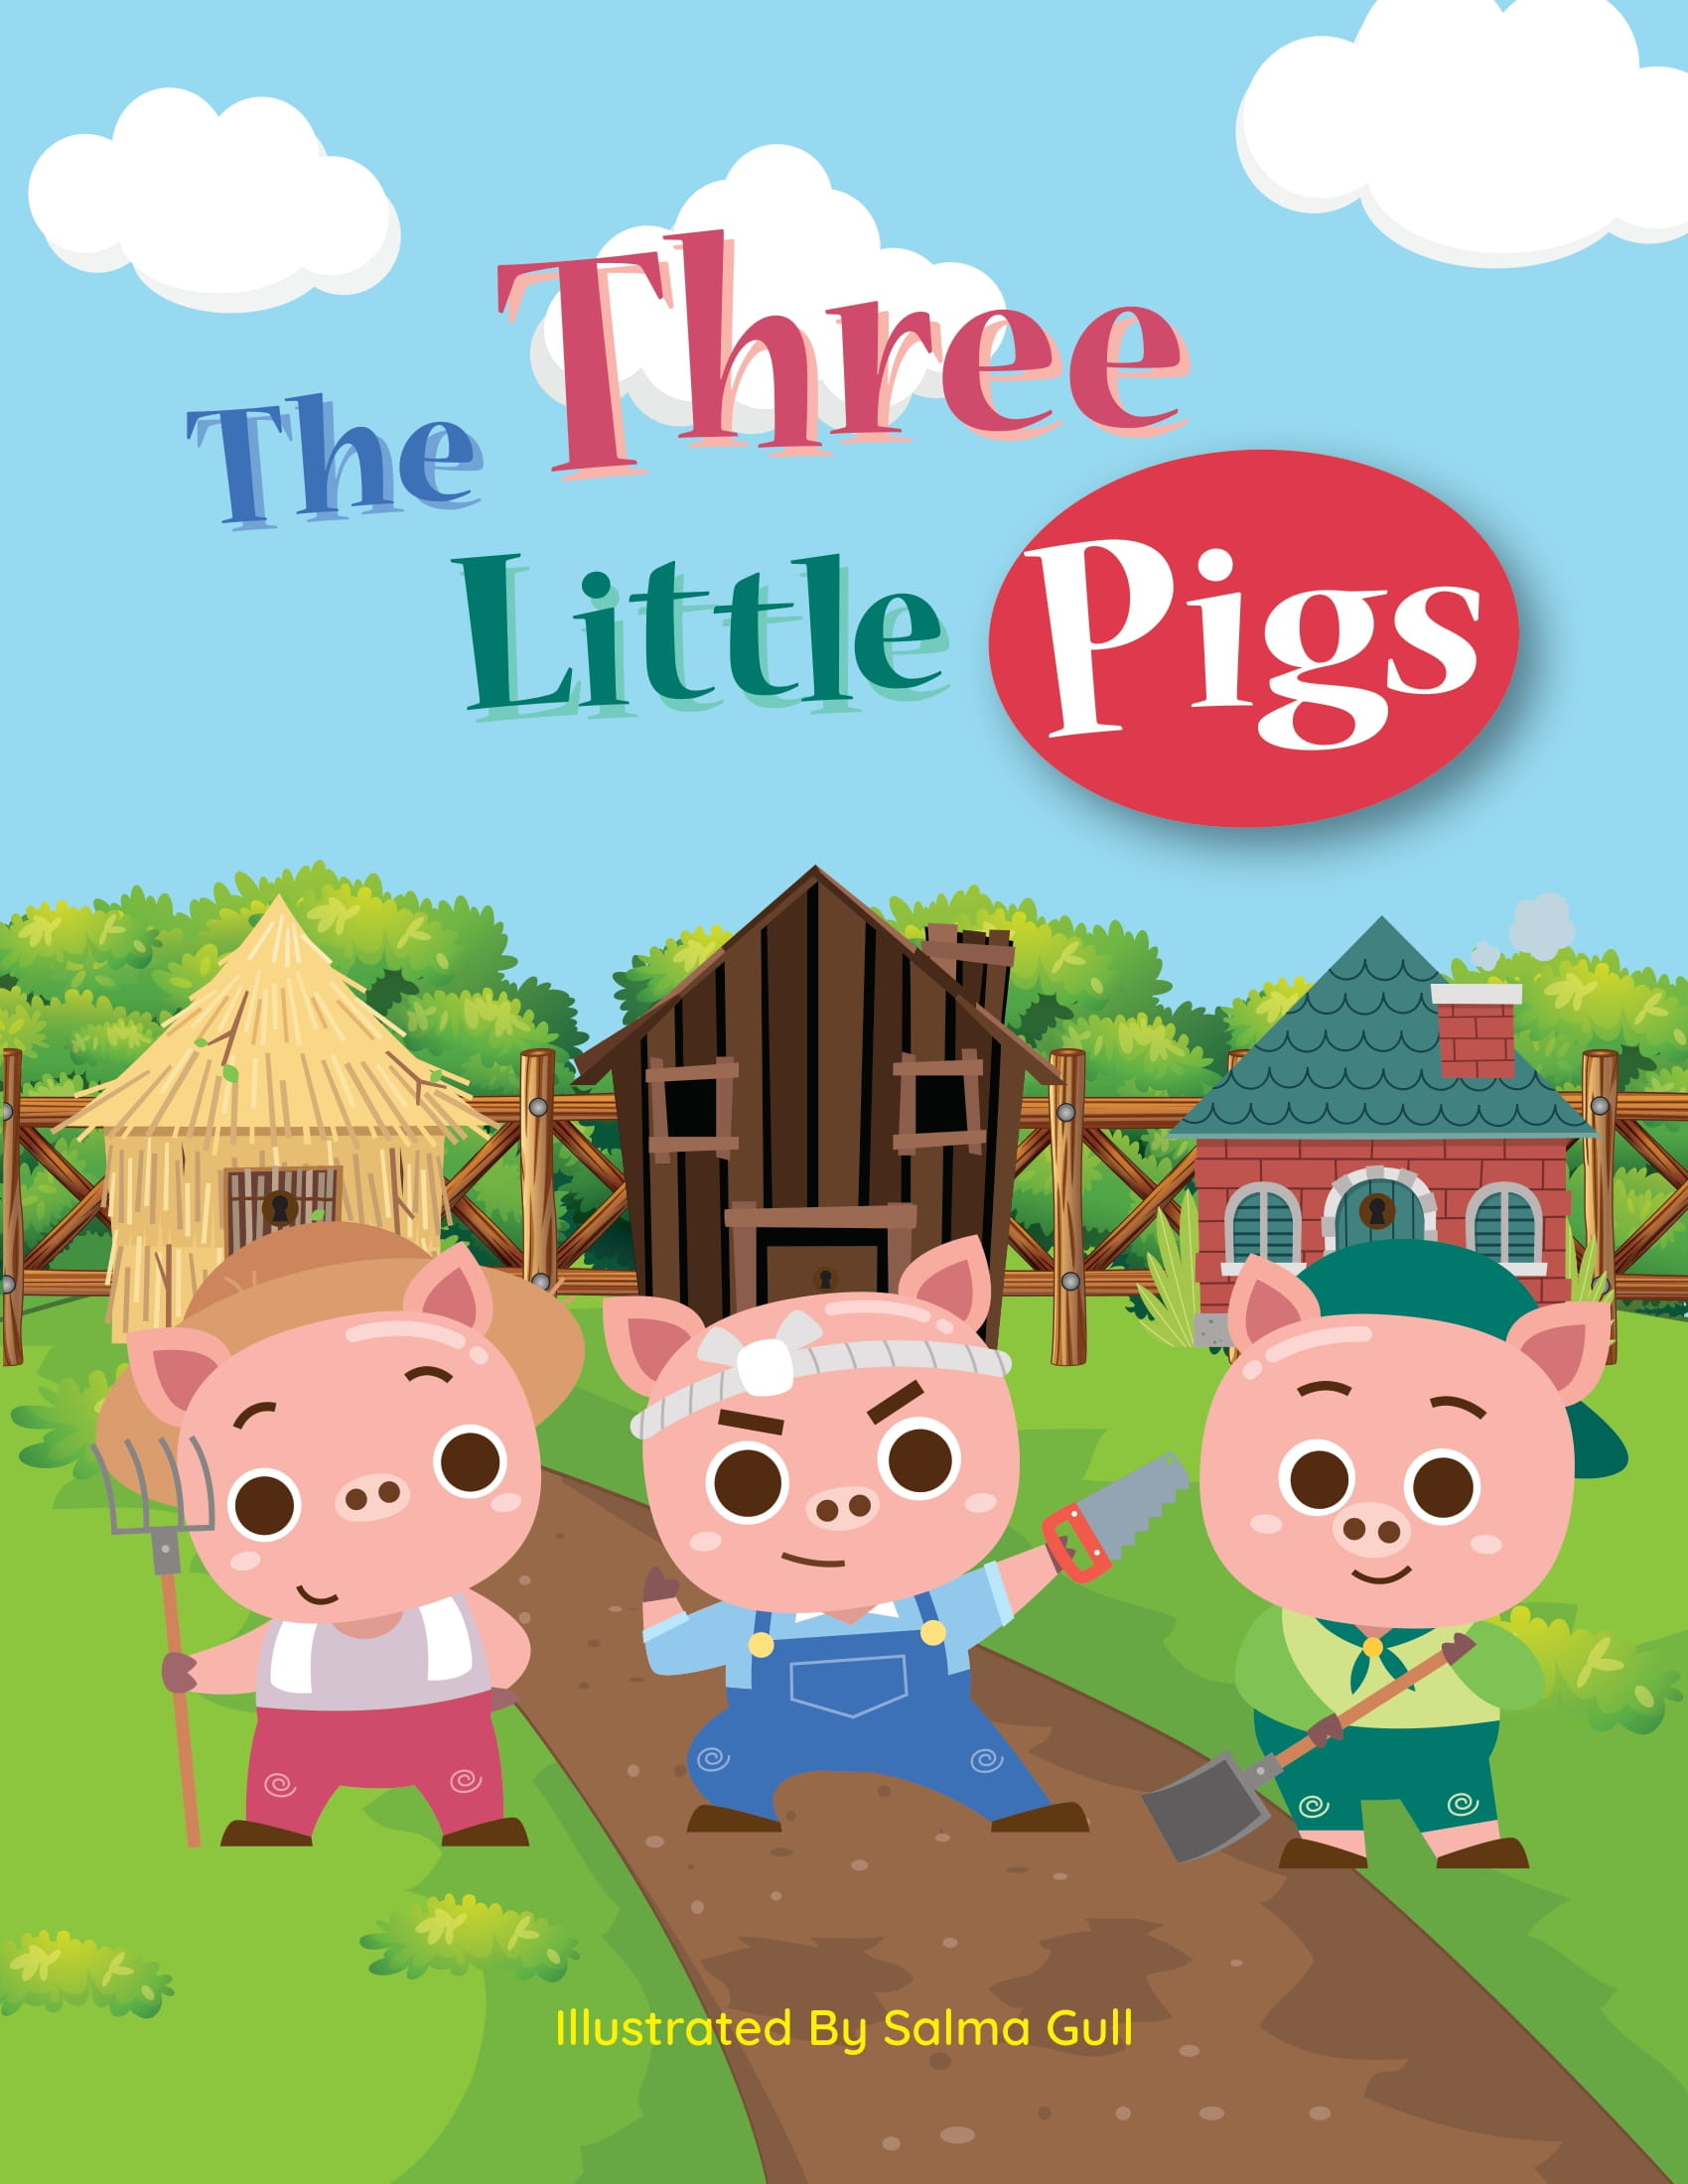 The three little pigs pdf book in english free printable papercraft templates